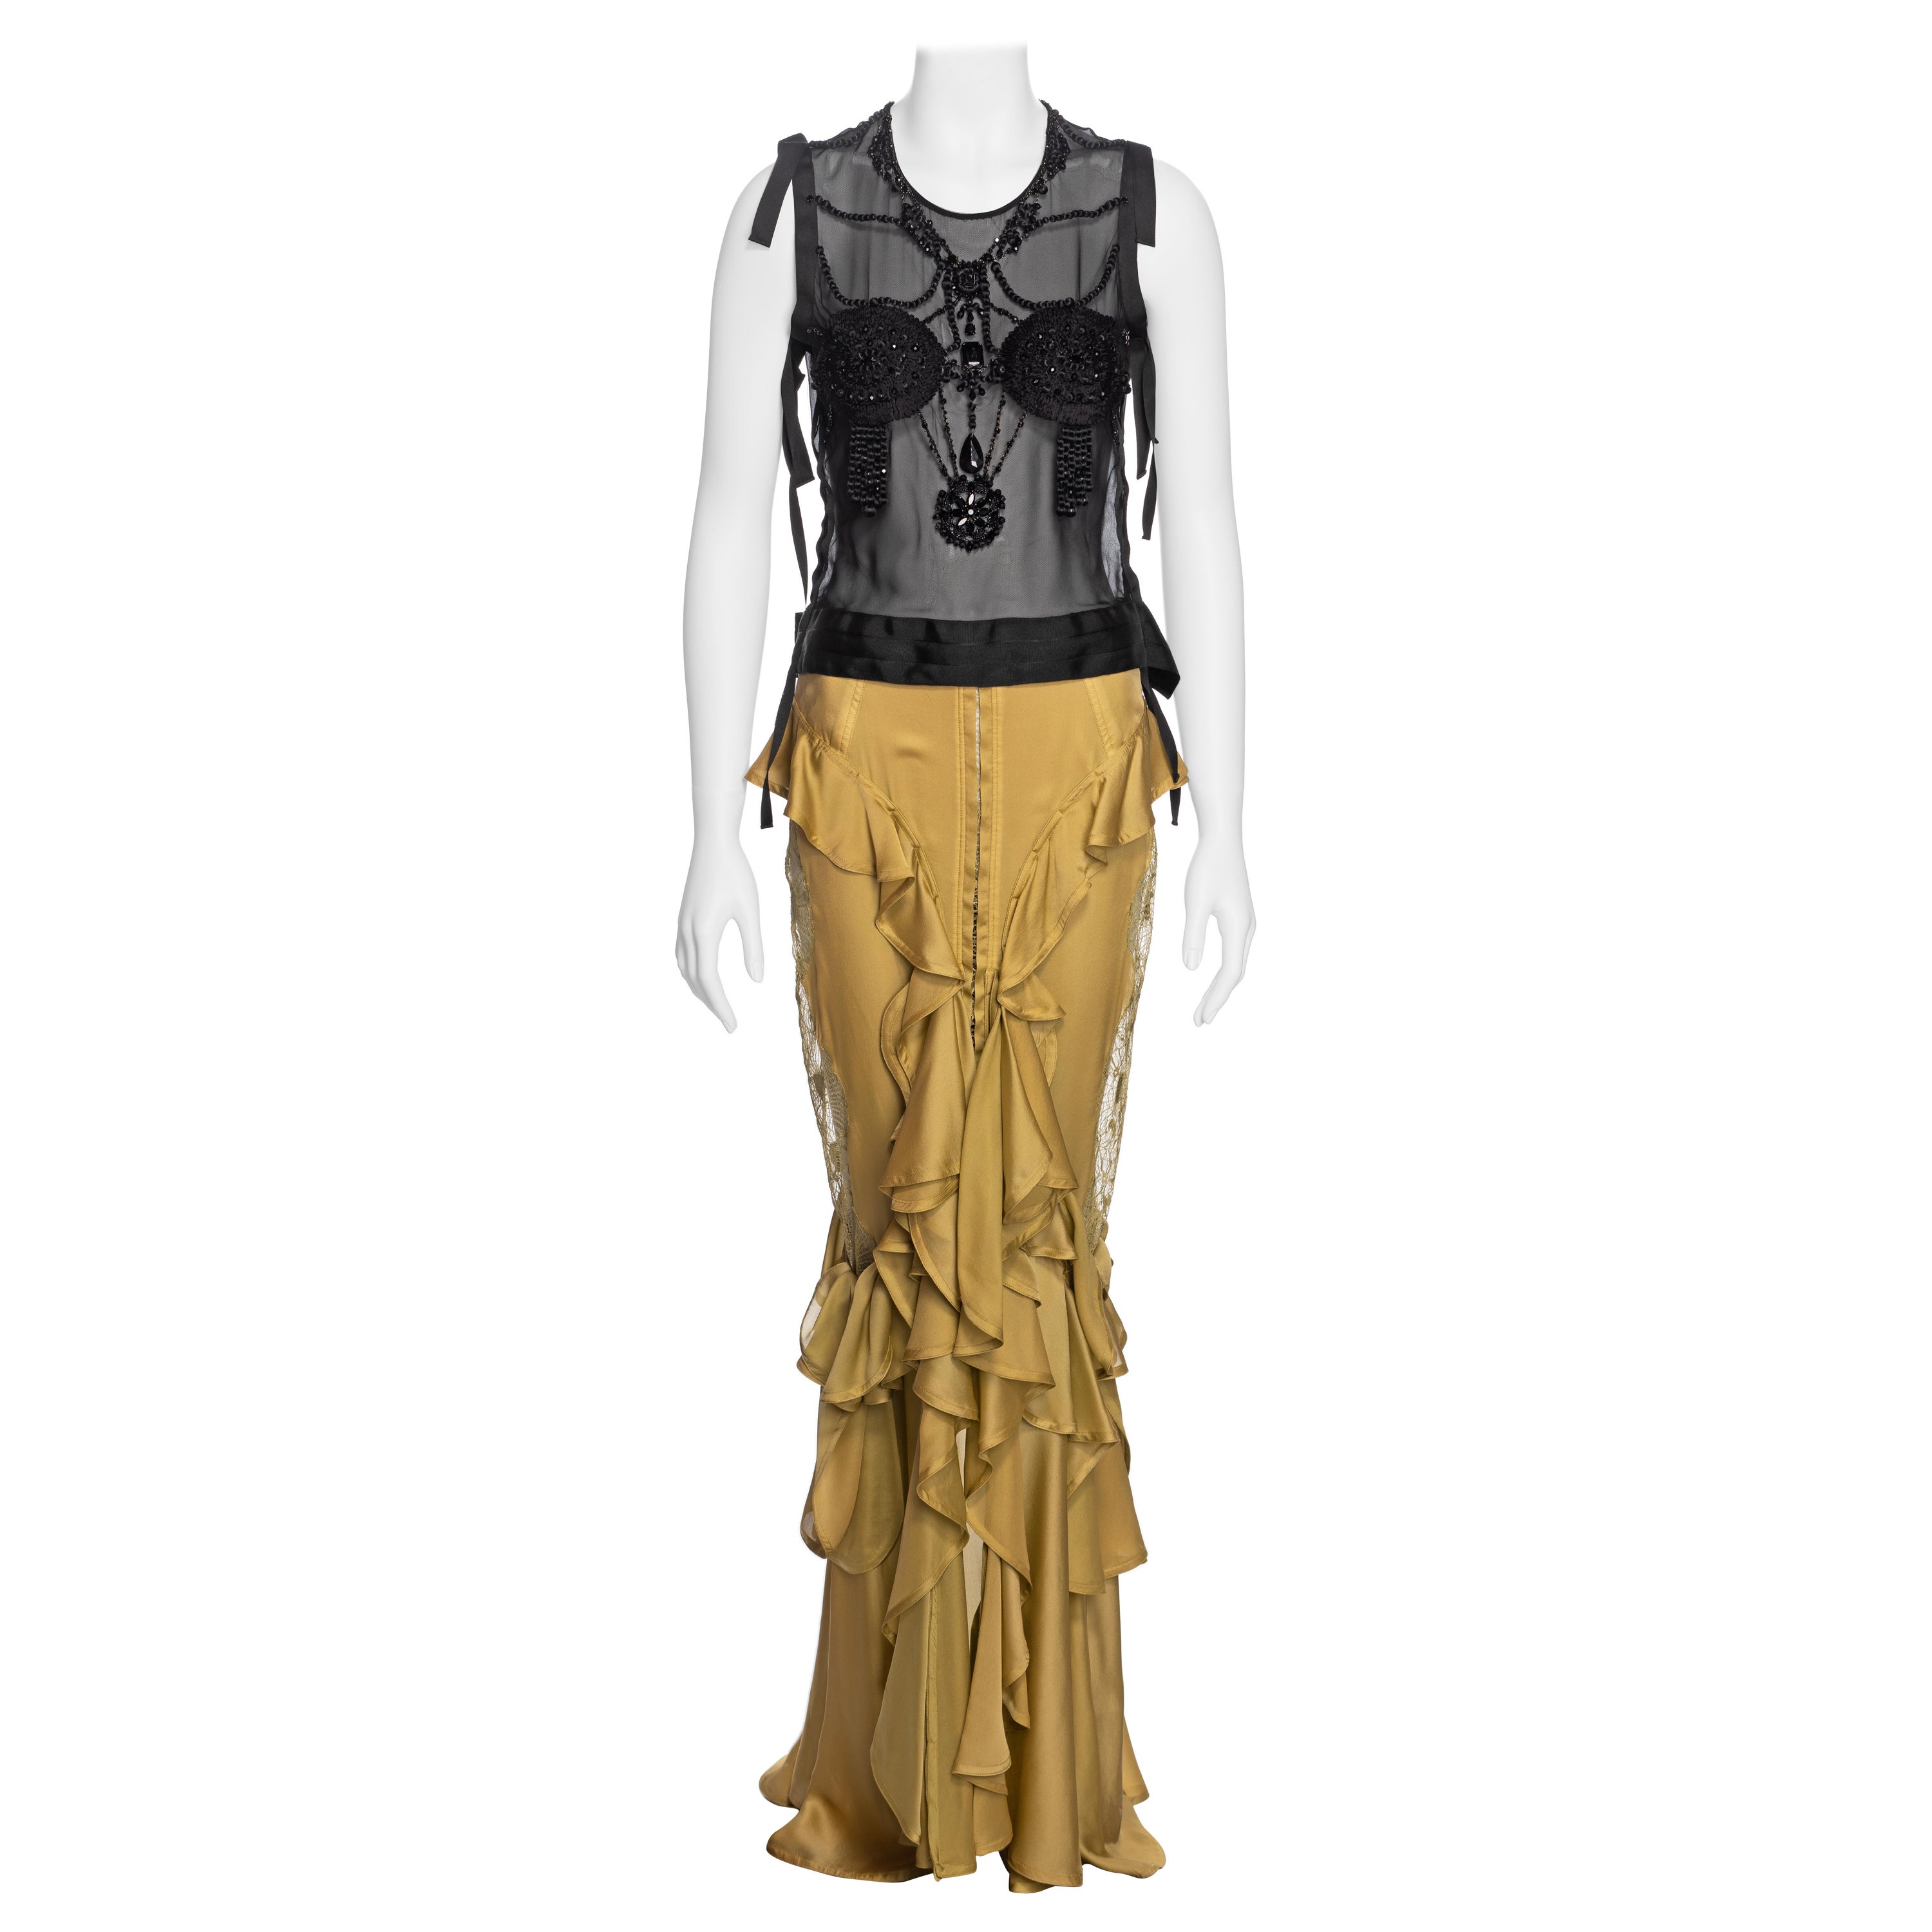 Yves Saint Laurent by Tom Ford Embellished Top and Silk Skirt Ensemble, FW 2003 For Sale